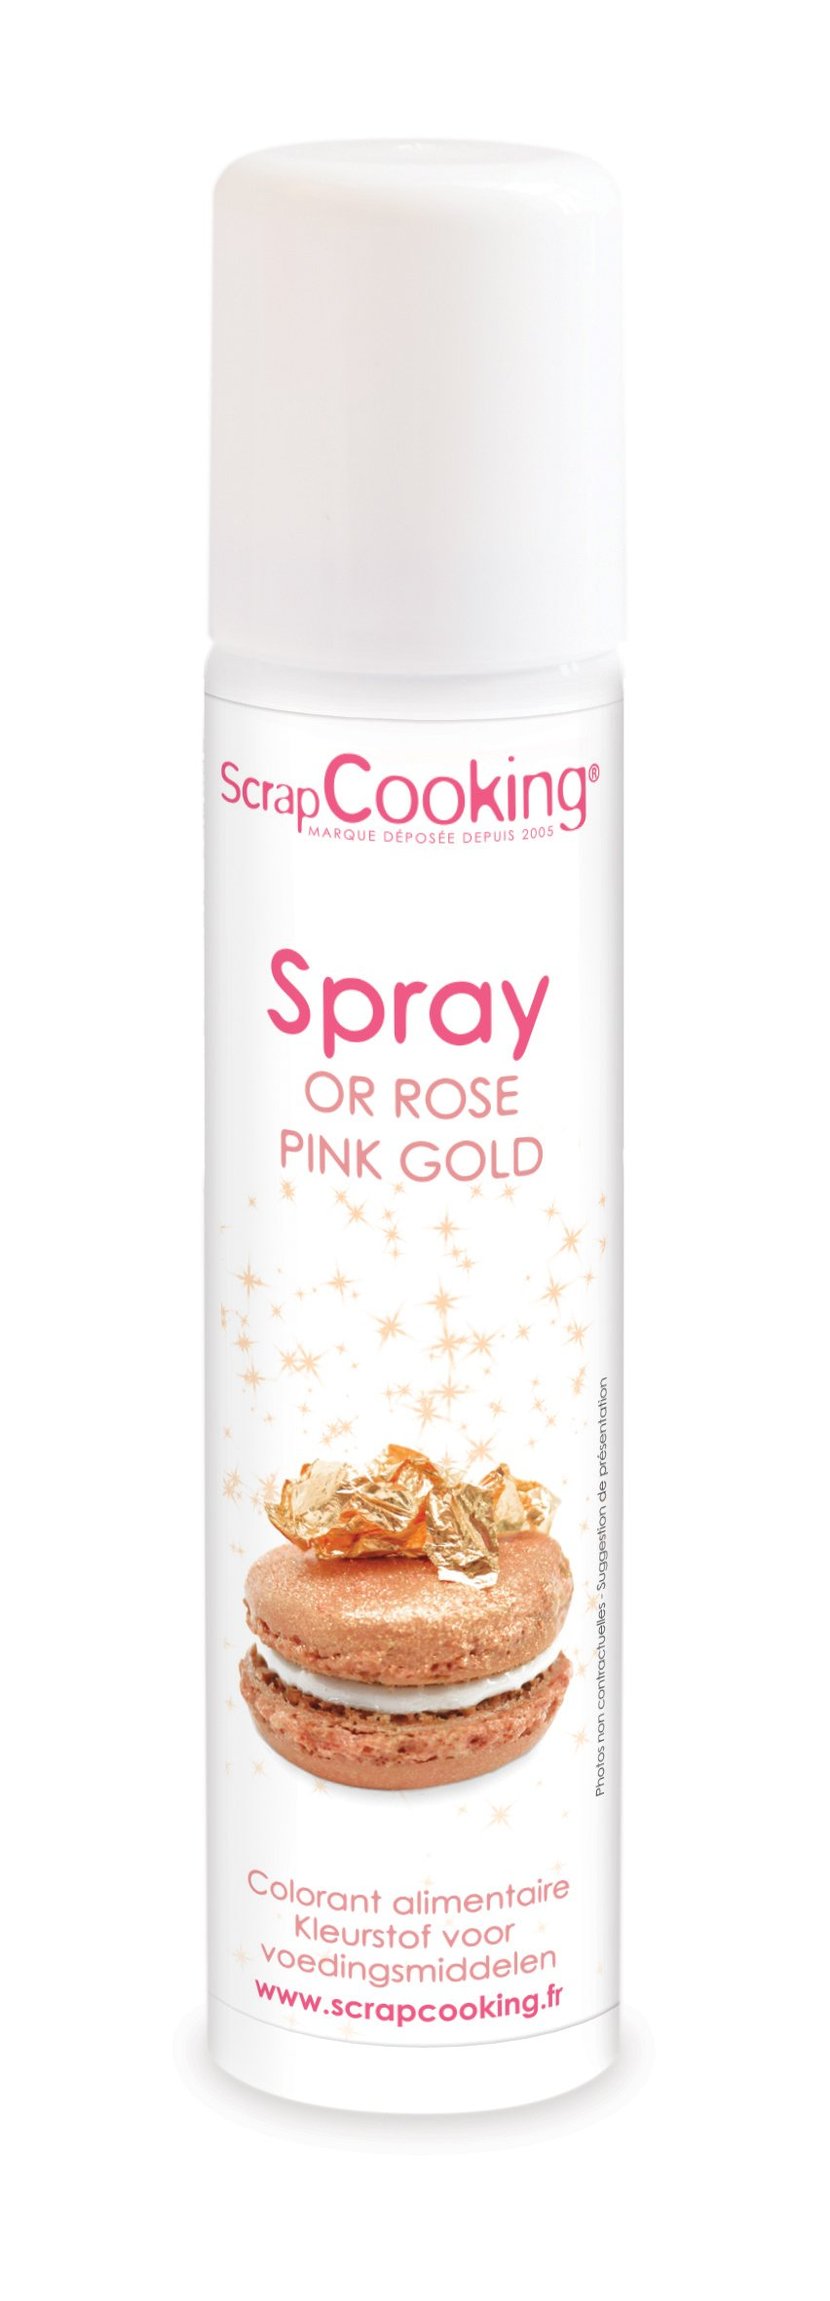 Spray colorant alimentaire - Or rose - 75ml